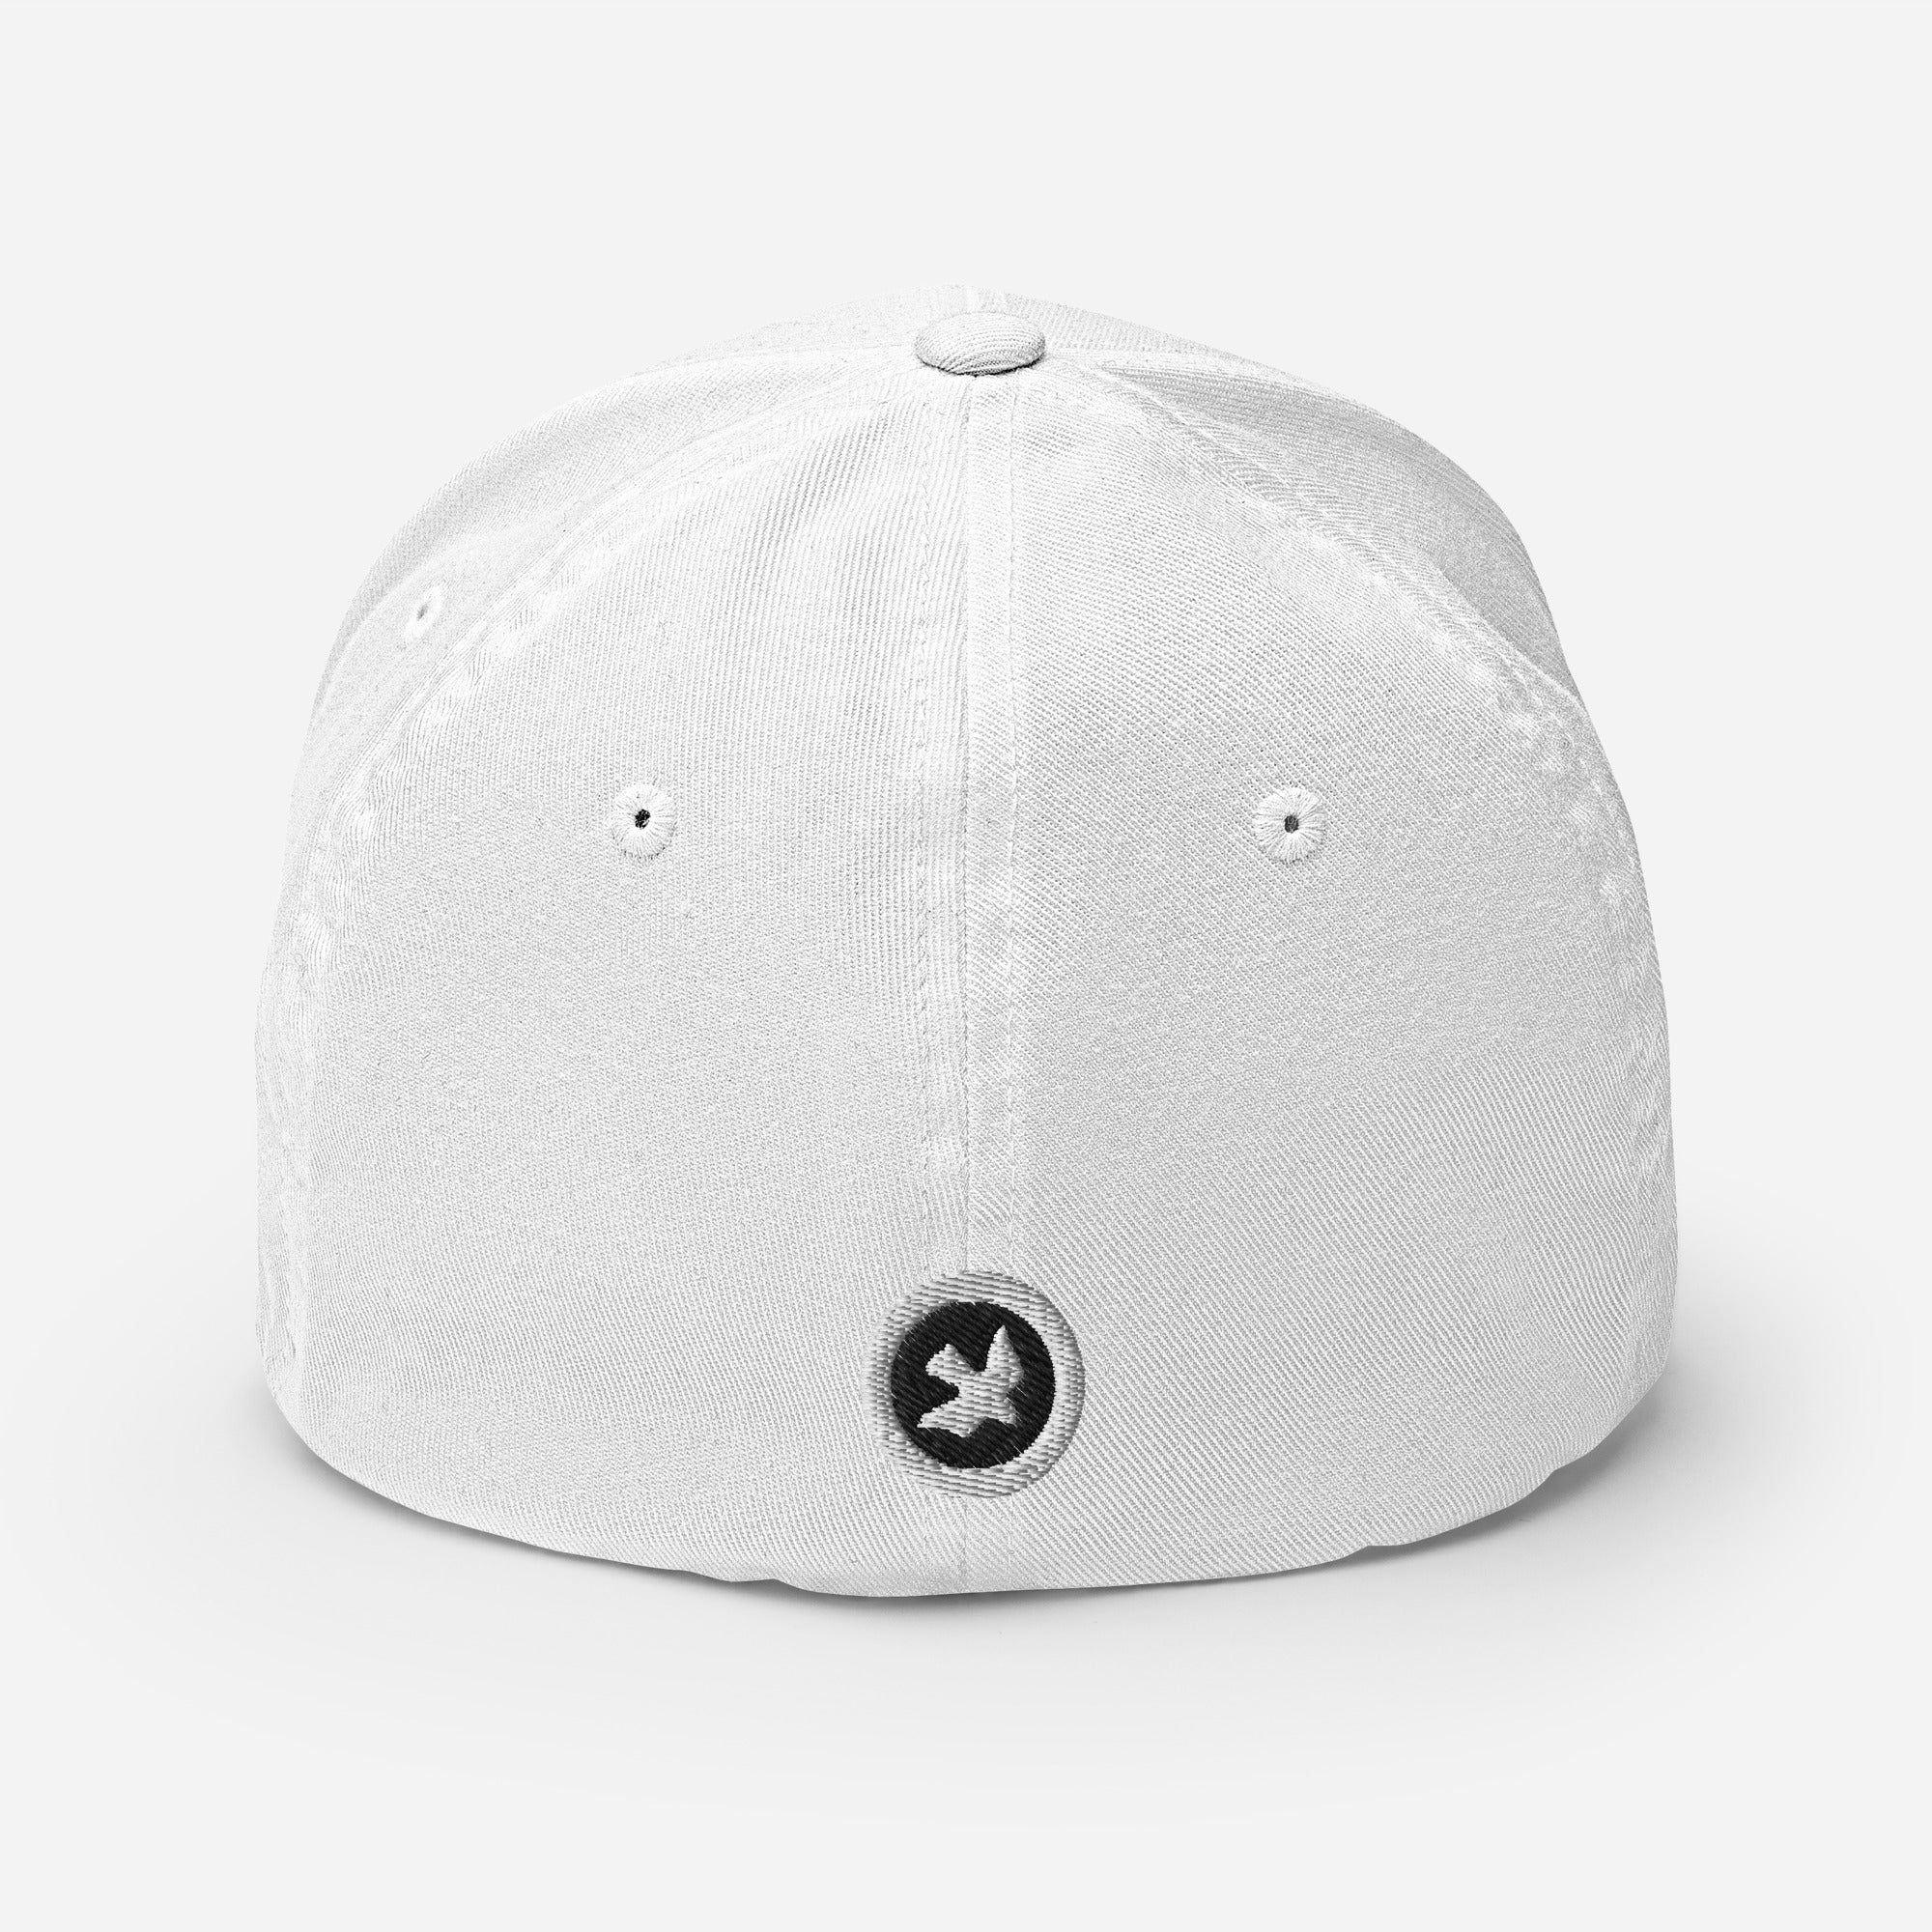 ISM  EMBROIDERY -- FLEXFIT - Structured Twill Cap